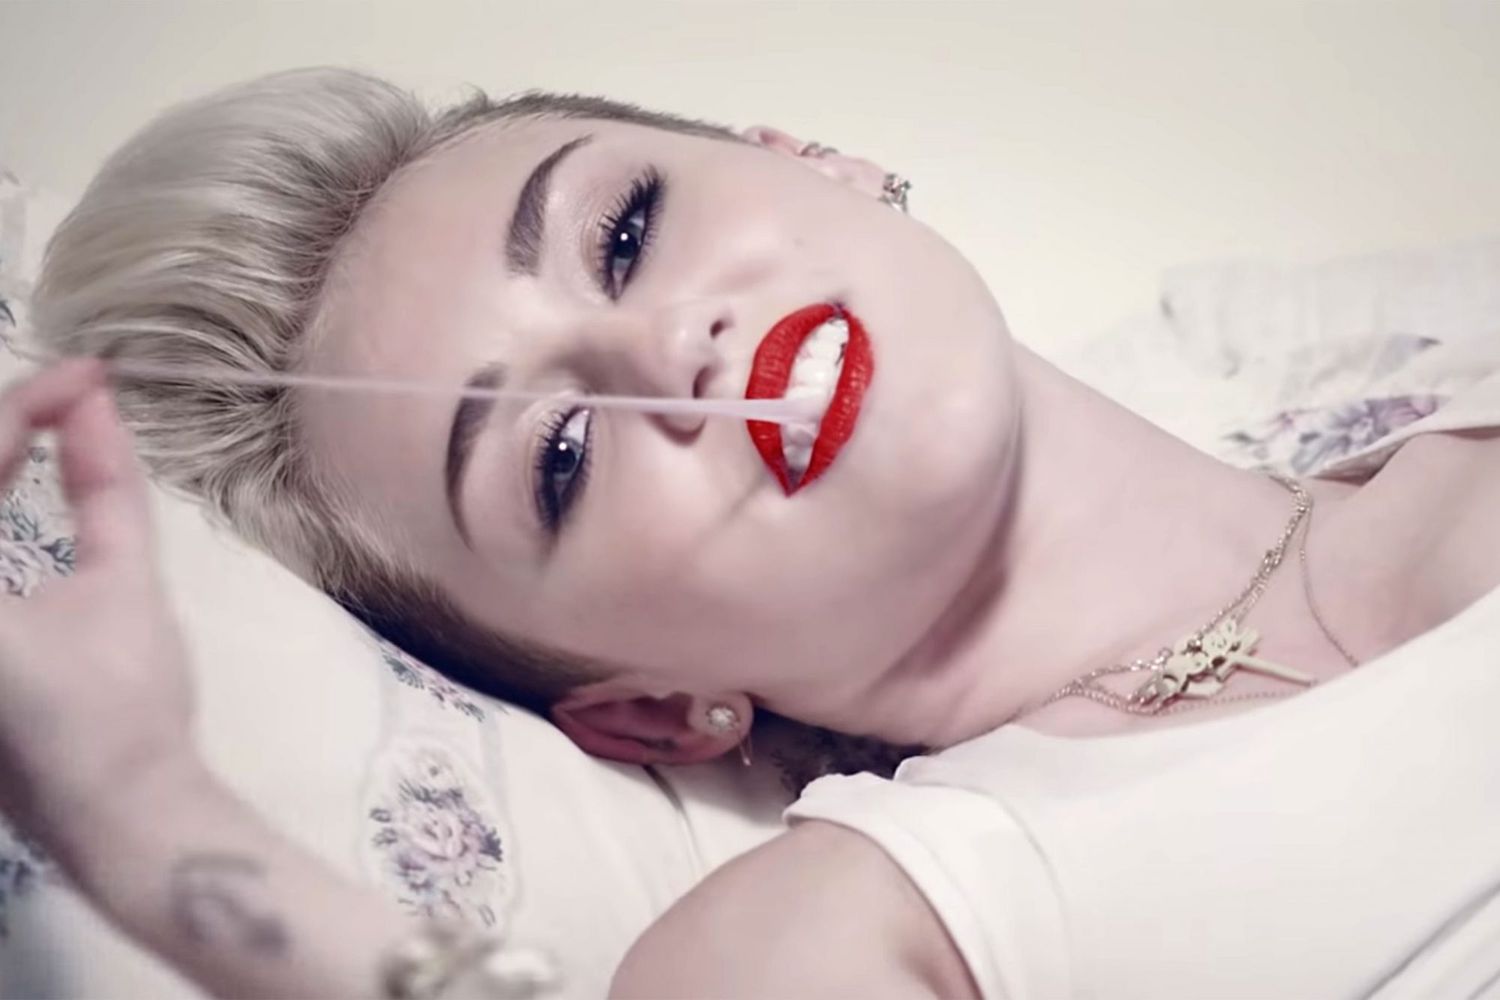 Miley Cyrus &ldquo;We Can_t Stop&rdquo;